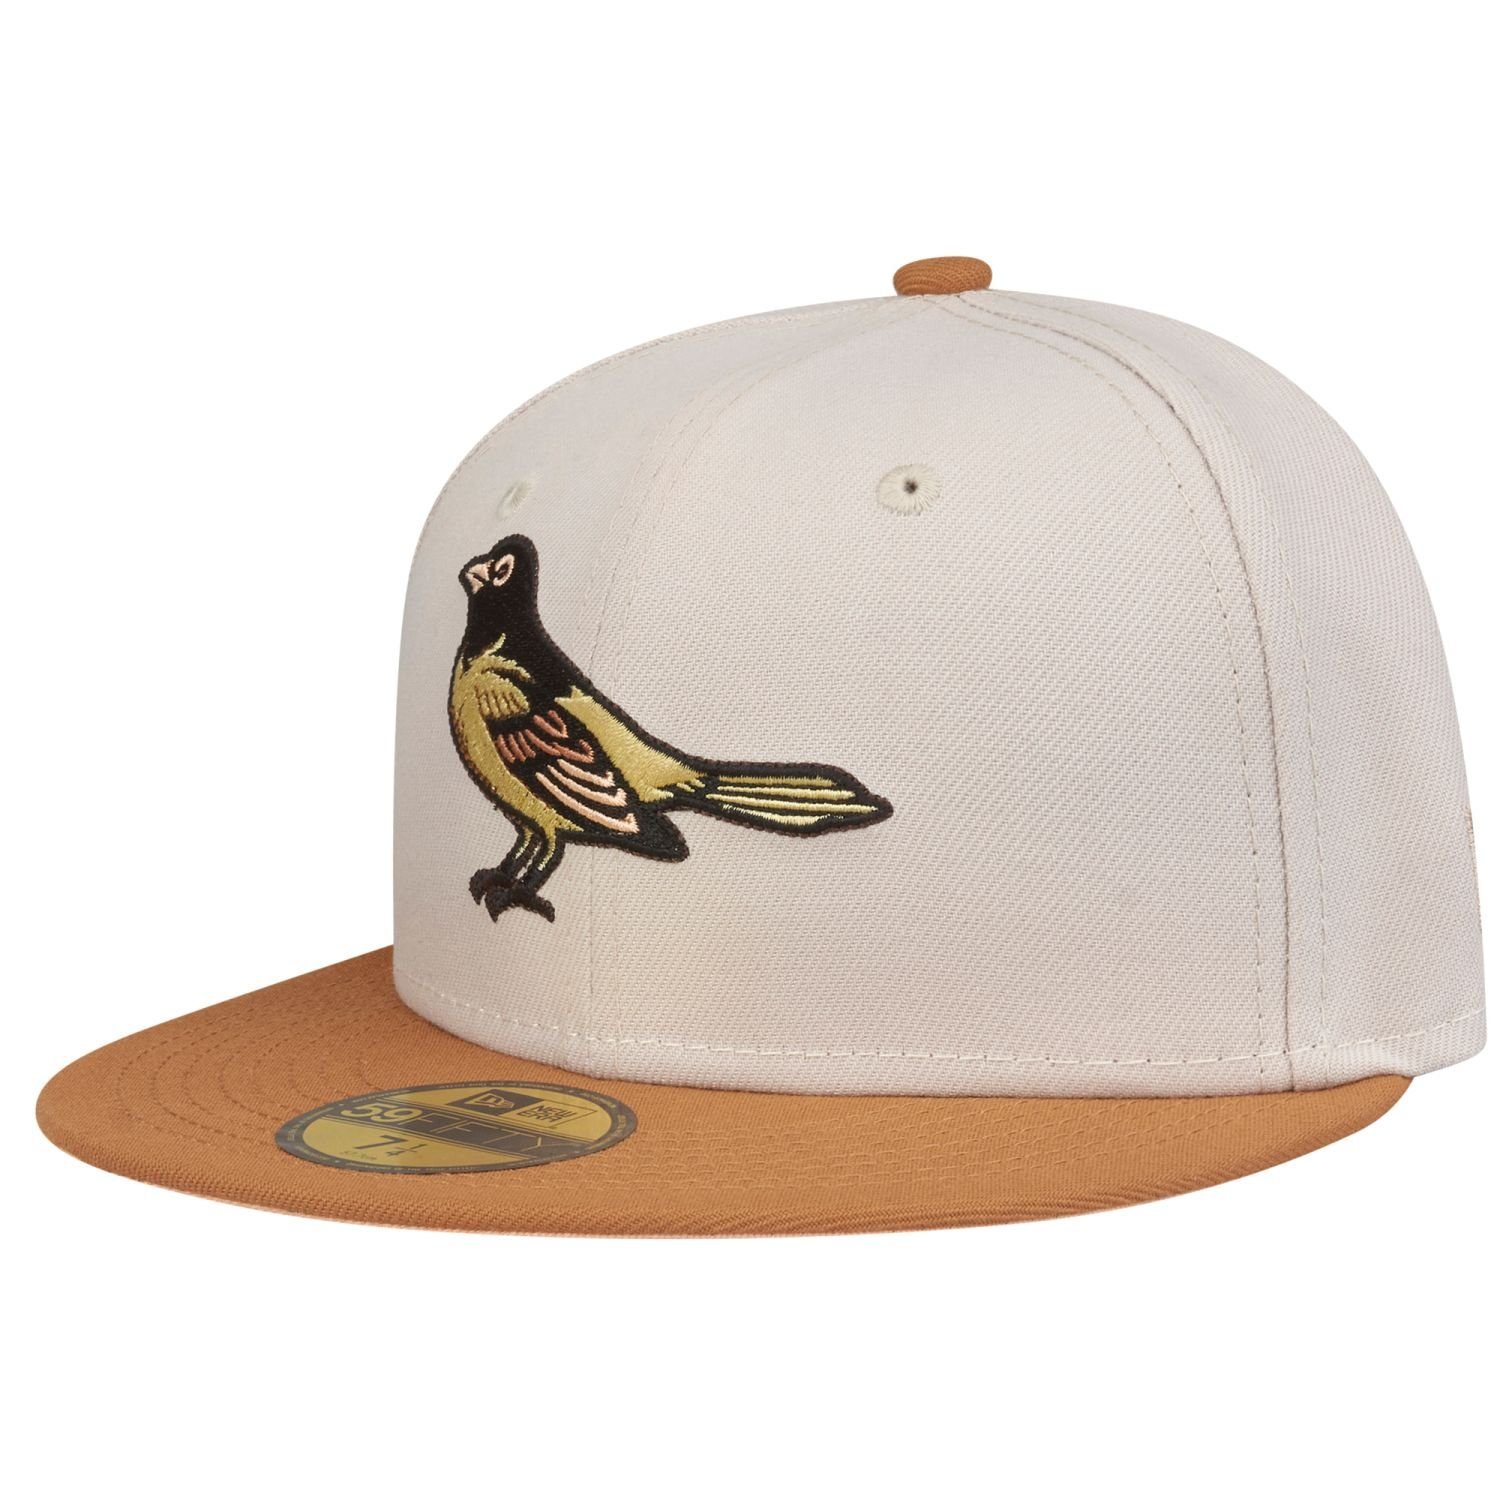 New Cap Baltimore Era 59Fifty COOPERSTOWN Fitted Orioles